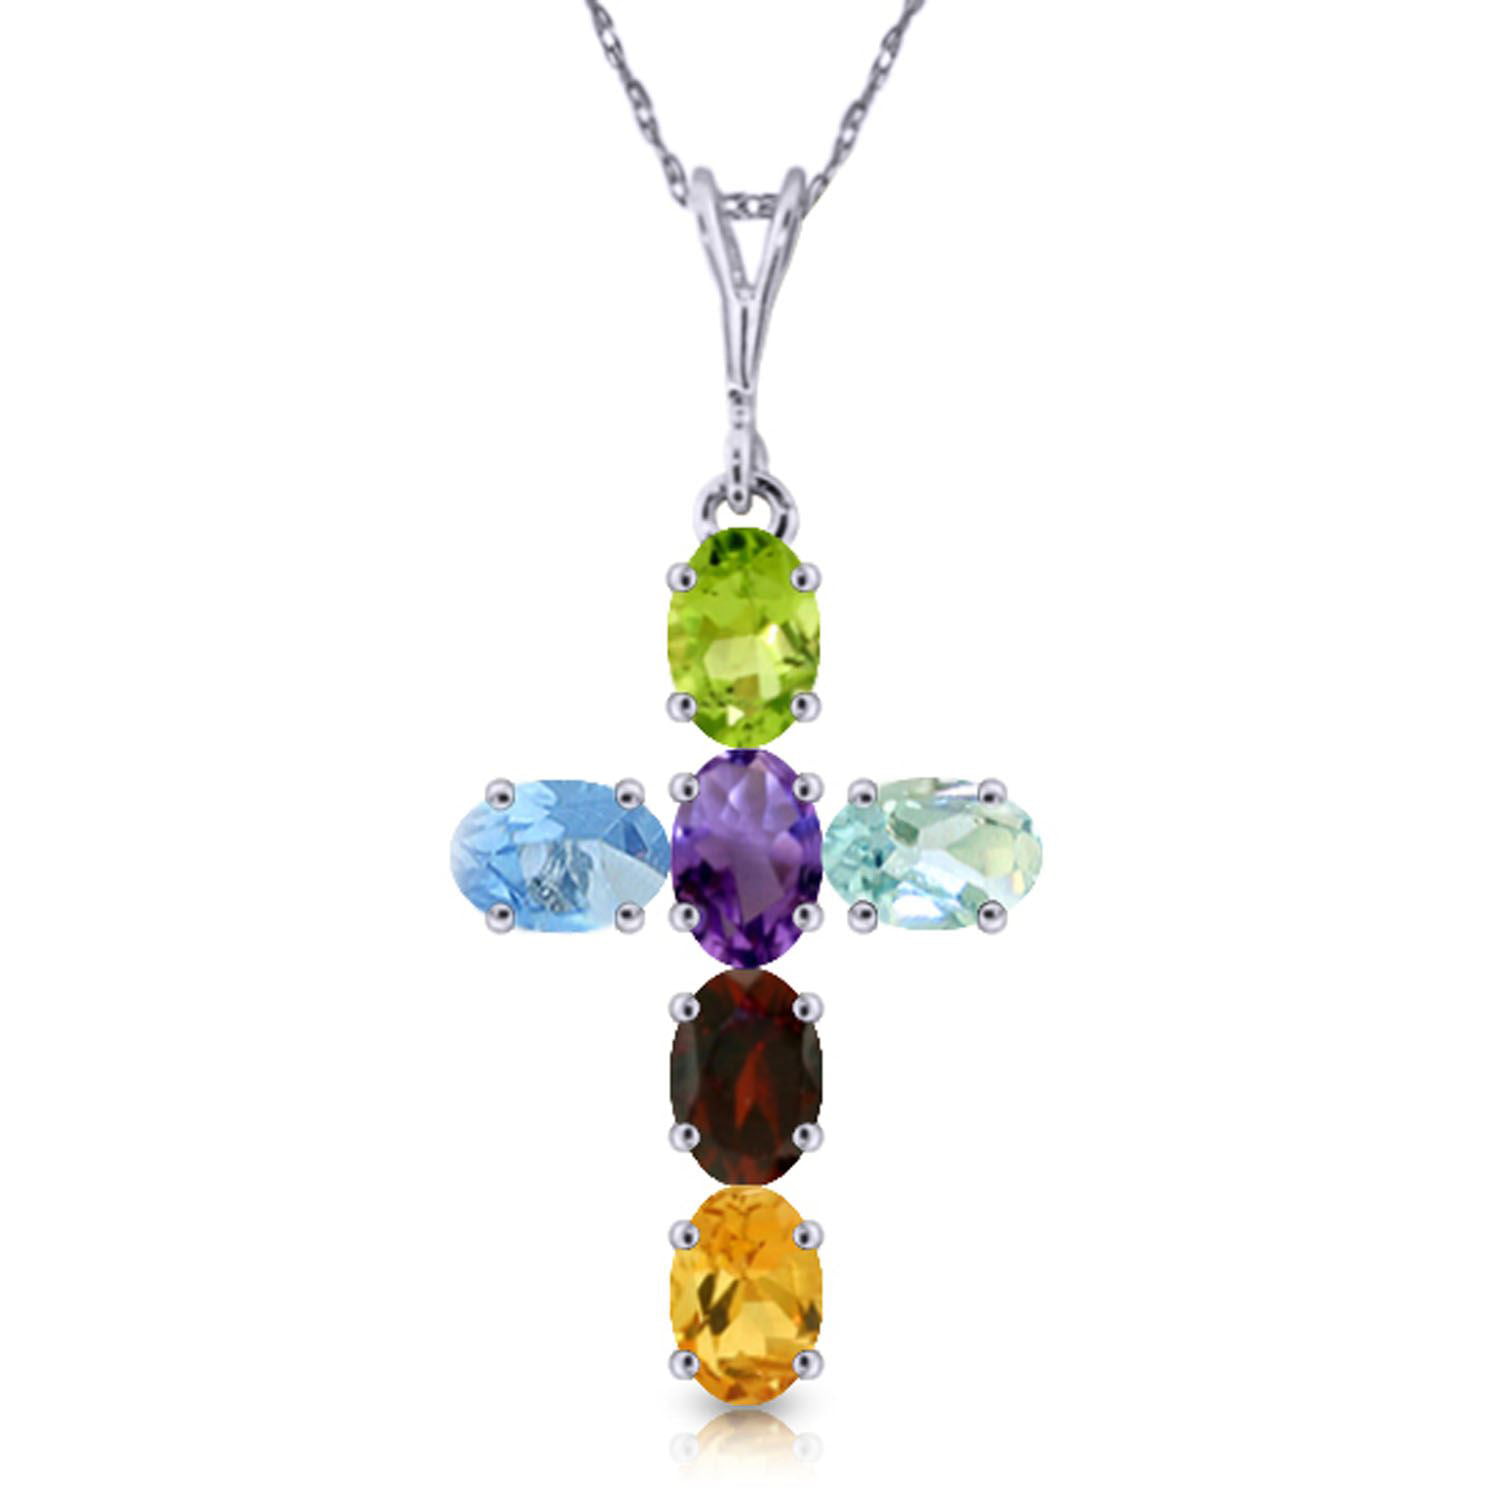 ALARRI 0.87 Carat 14K Solid White Gold Bouquet Garnet Citrine Peridot Necklace with 22 Inch Chain Length 